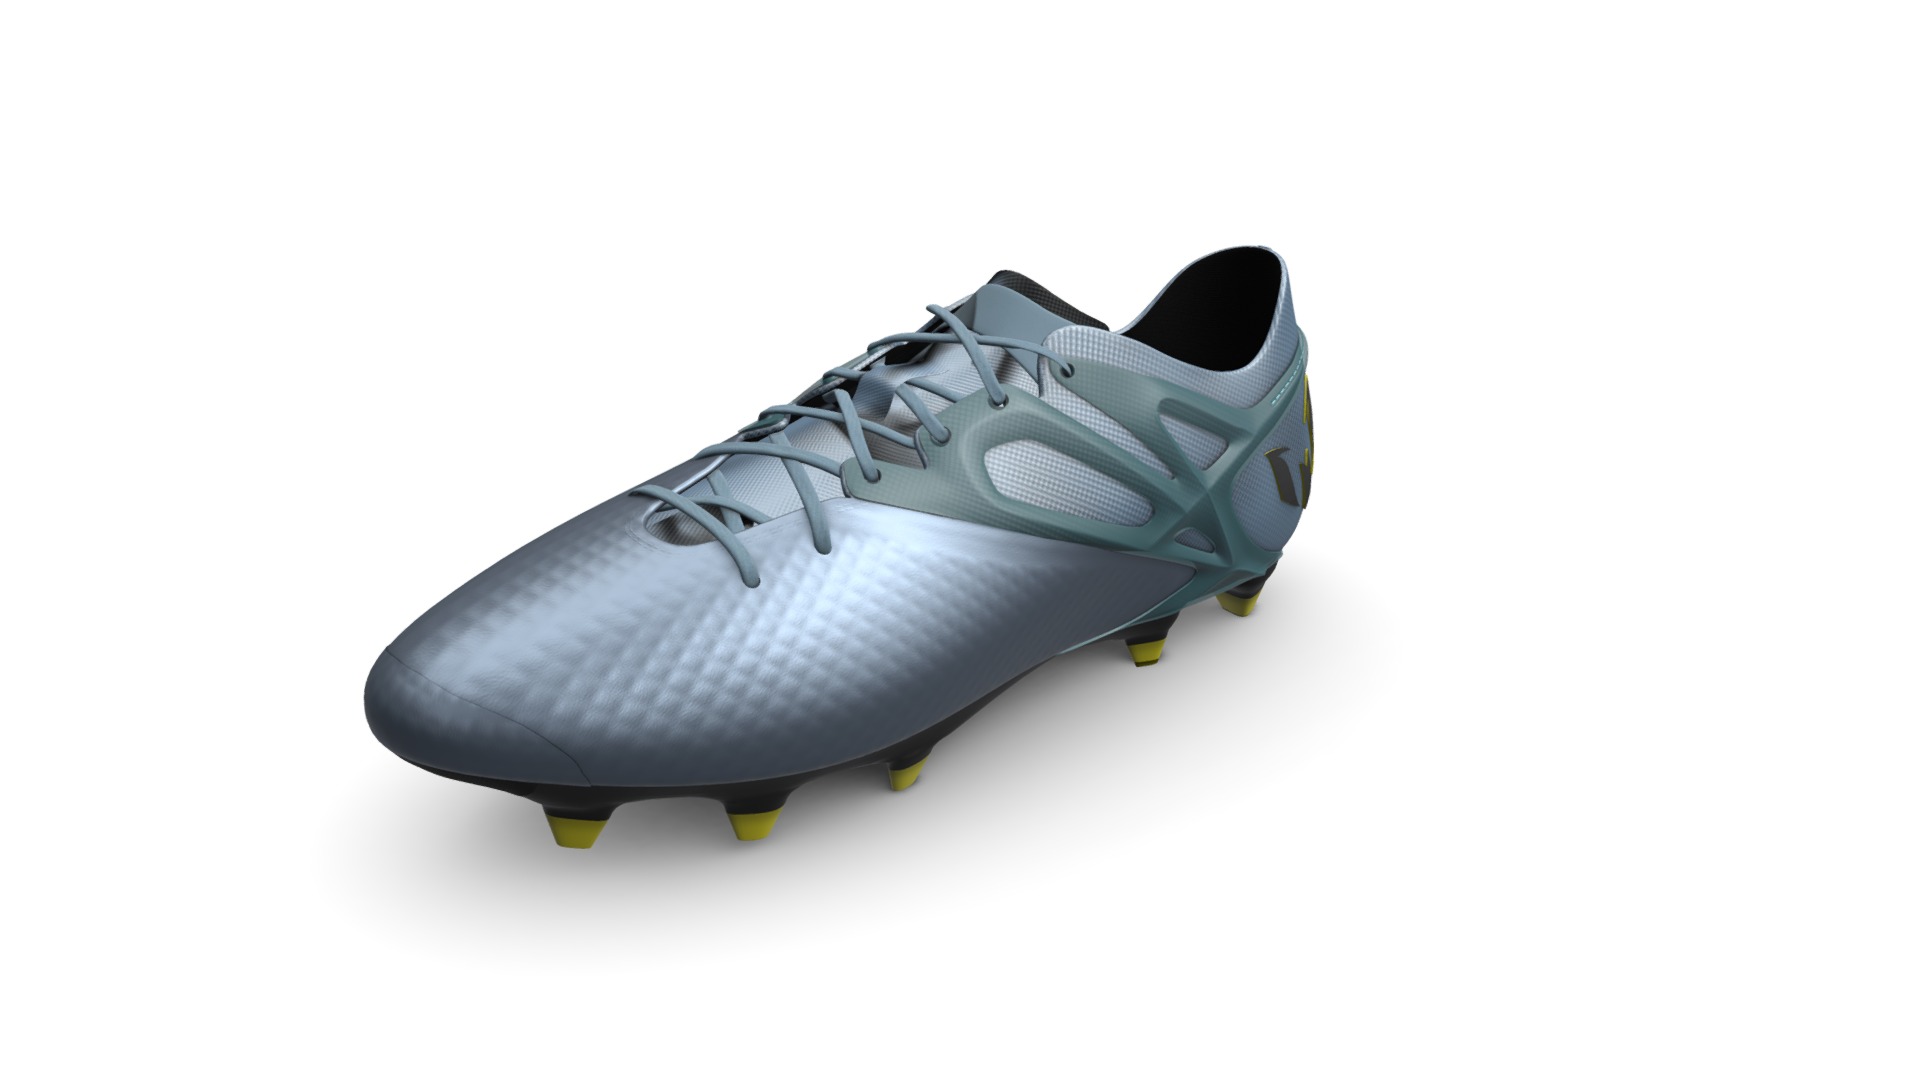 3D model Adidas Messi 15.1 - This is a 3D model of the Adidas Messi 15.1. The 3D model is about a black and grey shoe.